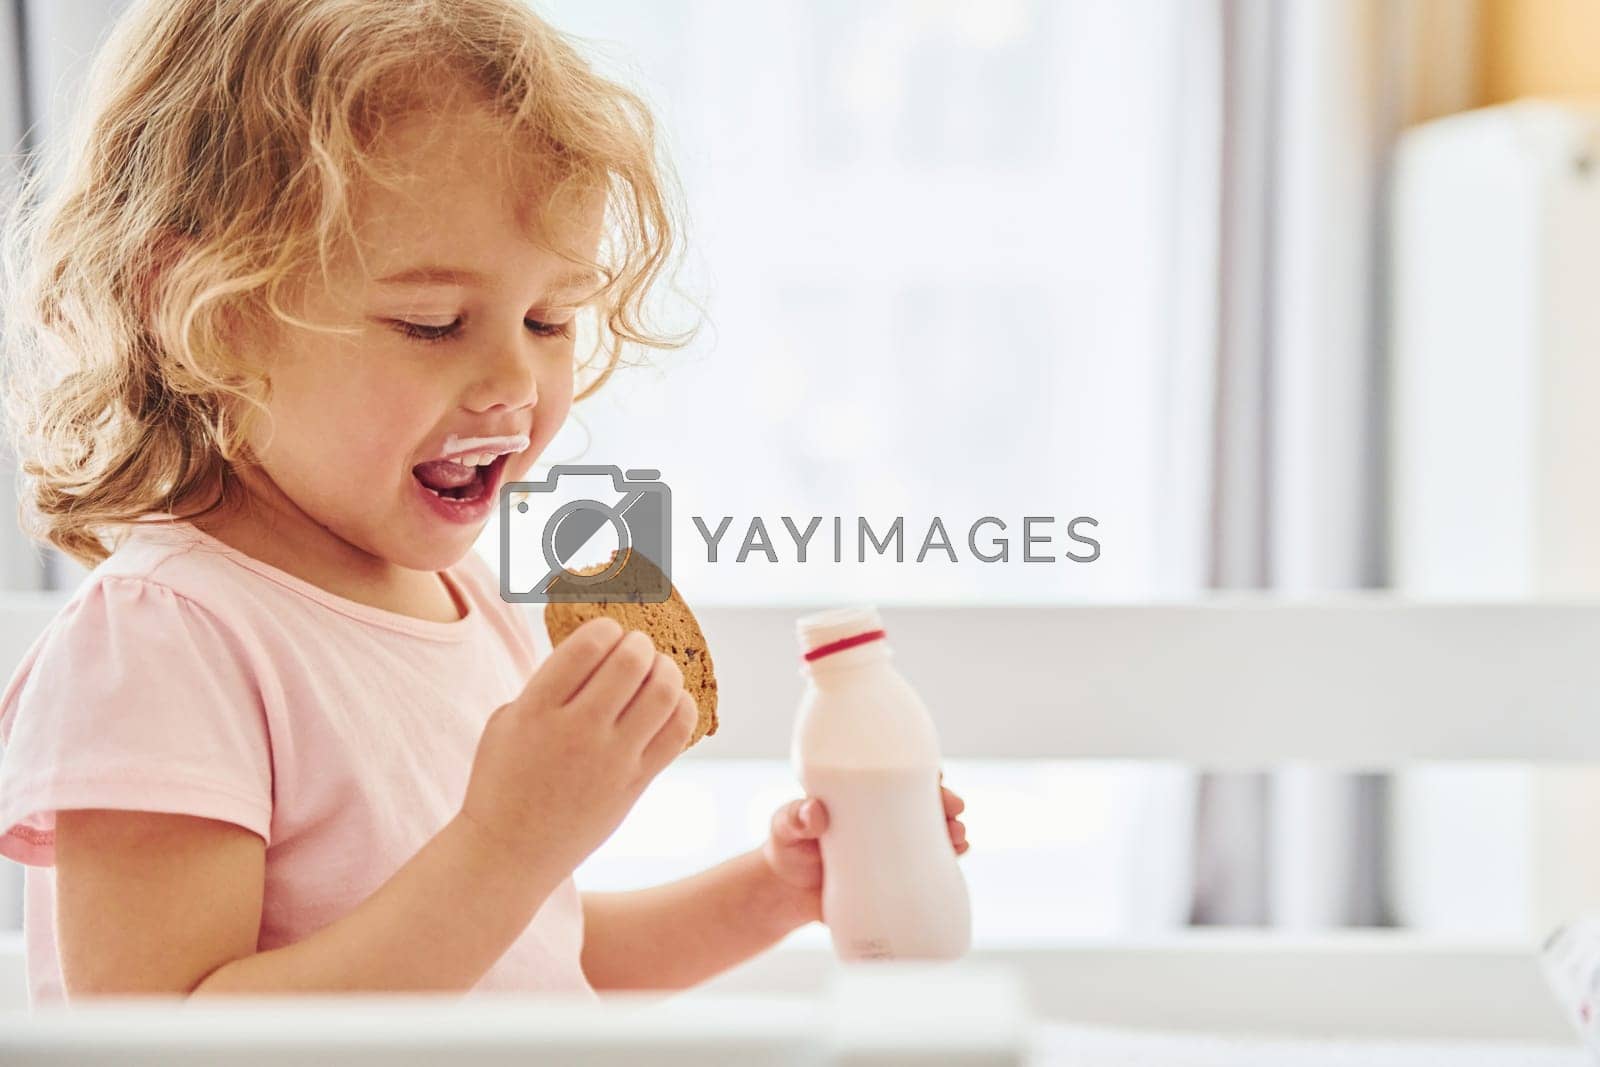 Royalty free image of Sitting on the bed, eating cookies and drinking milk. Cute little girl in casual clothes is indoors at home at daytime by Standret